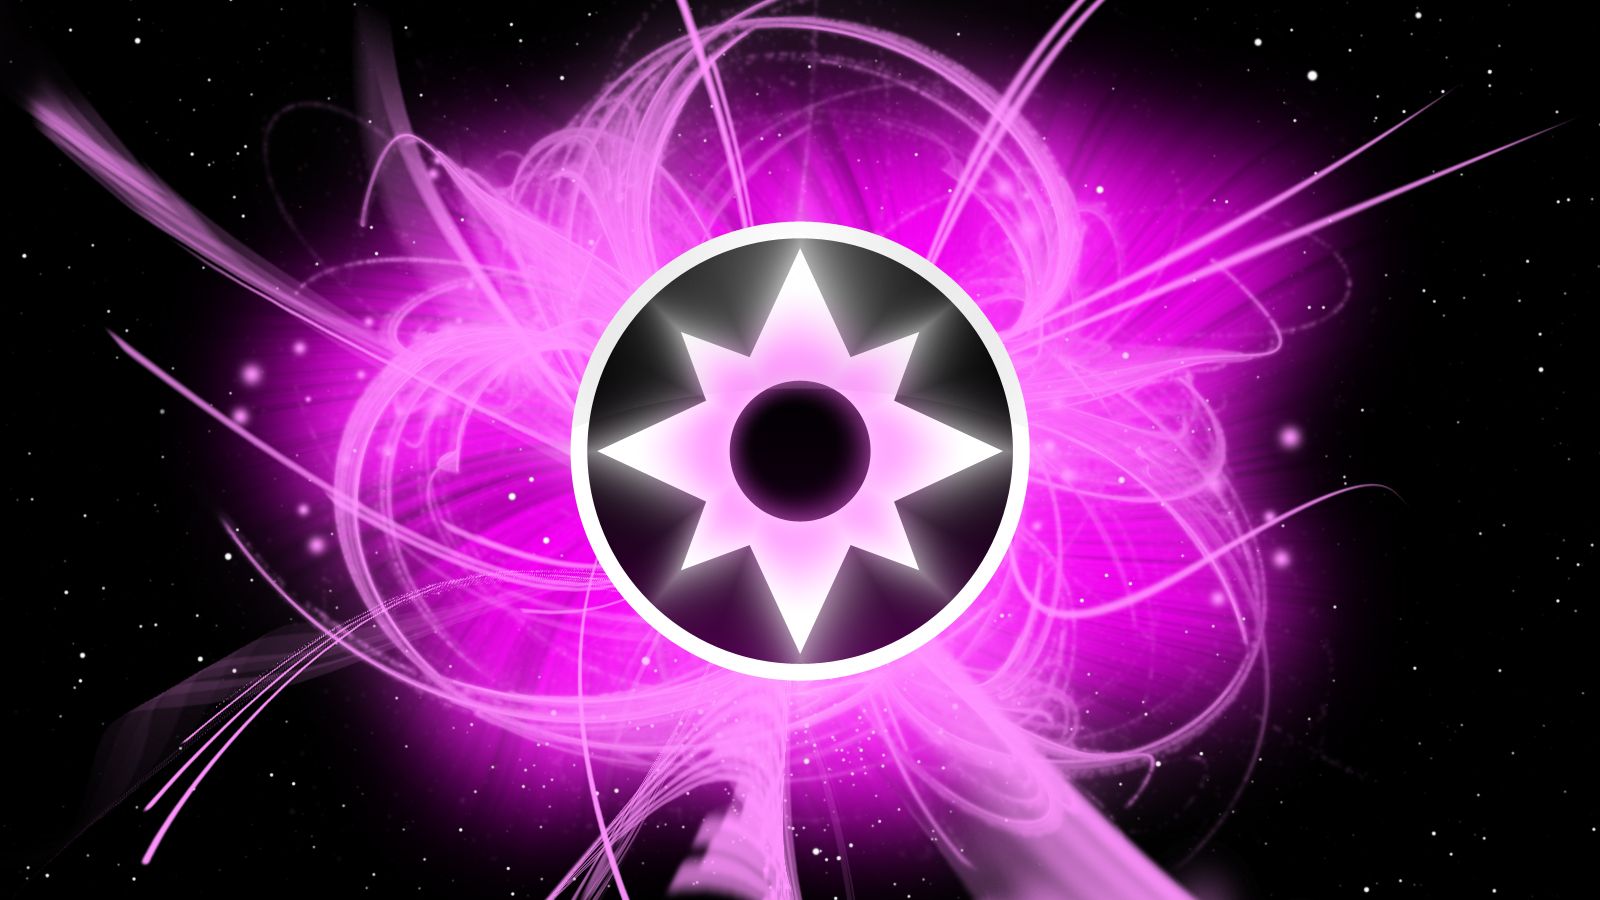 The Nine Lantern Corps 5 on FlowVella Software for Mac iPad and iPhone